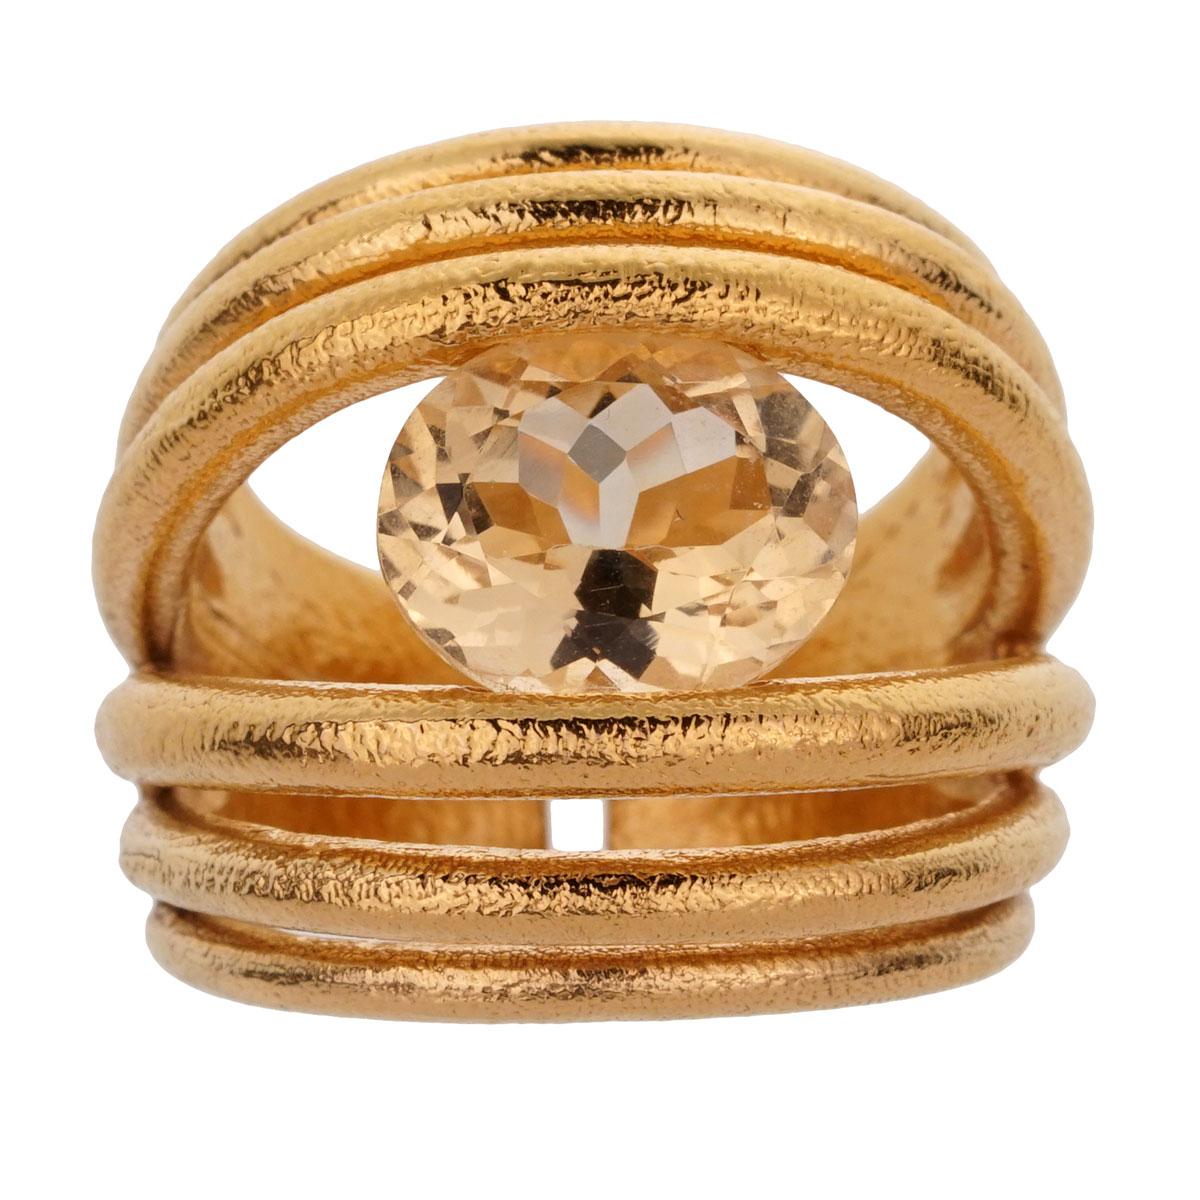 A stylish yellow gold Tous cocktail ring, the ring features a 5ct oval quartz set in textured 18k yellow gold.

Sku: 1942